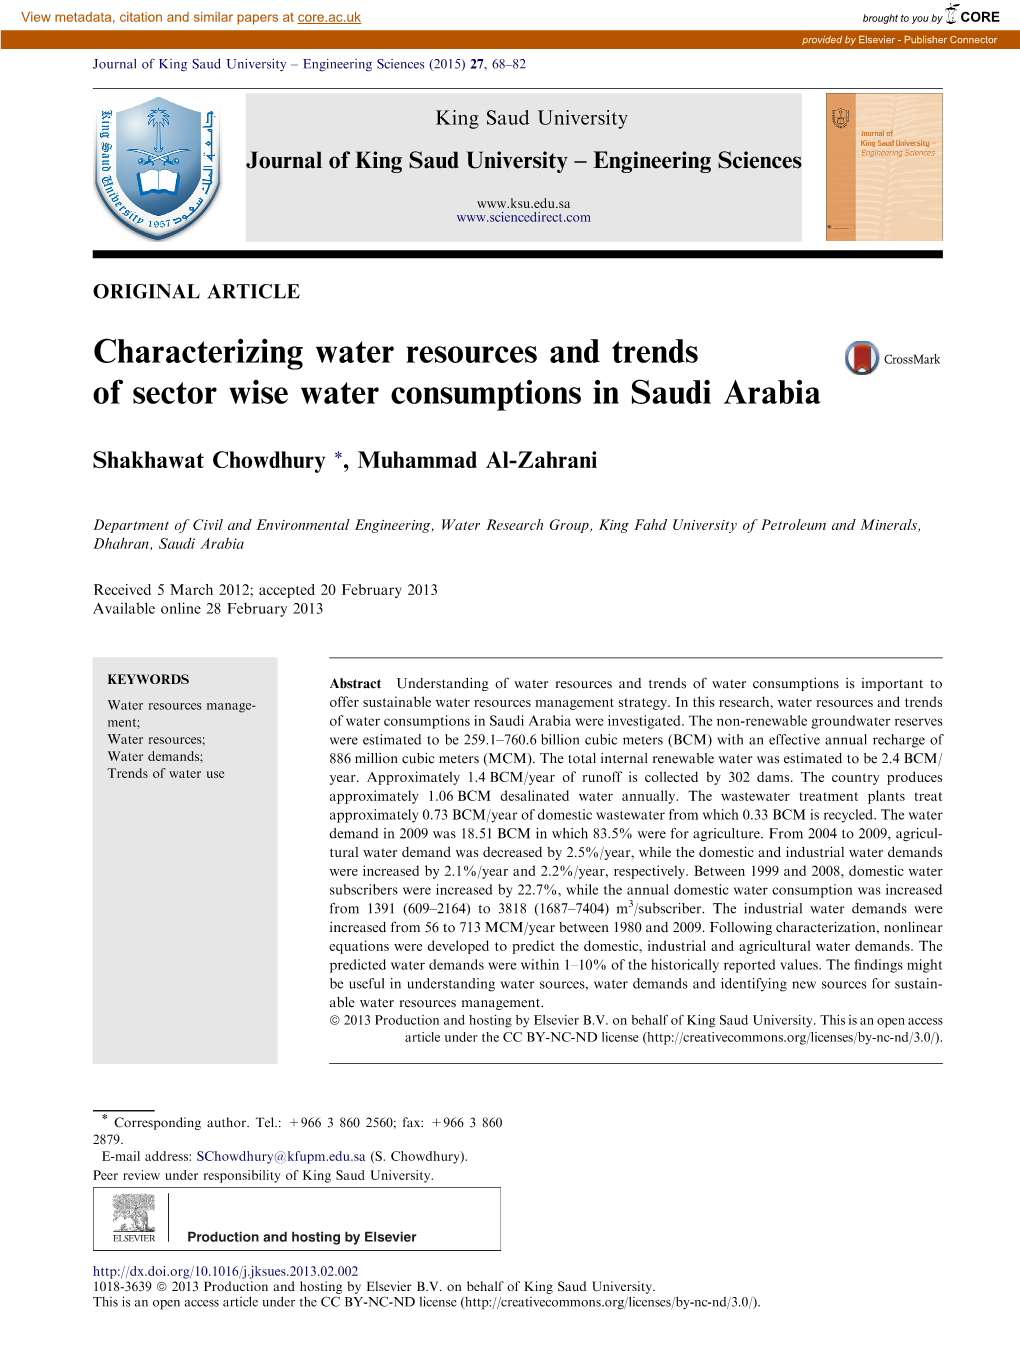 Characterizing Water Resources and Trends of Sector Wise Water Consumptions in Saudi Arabia